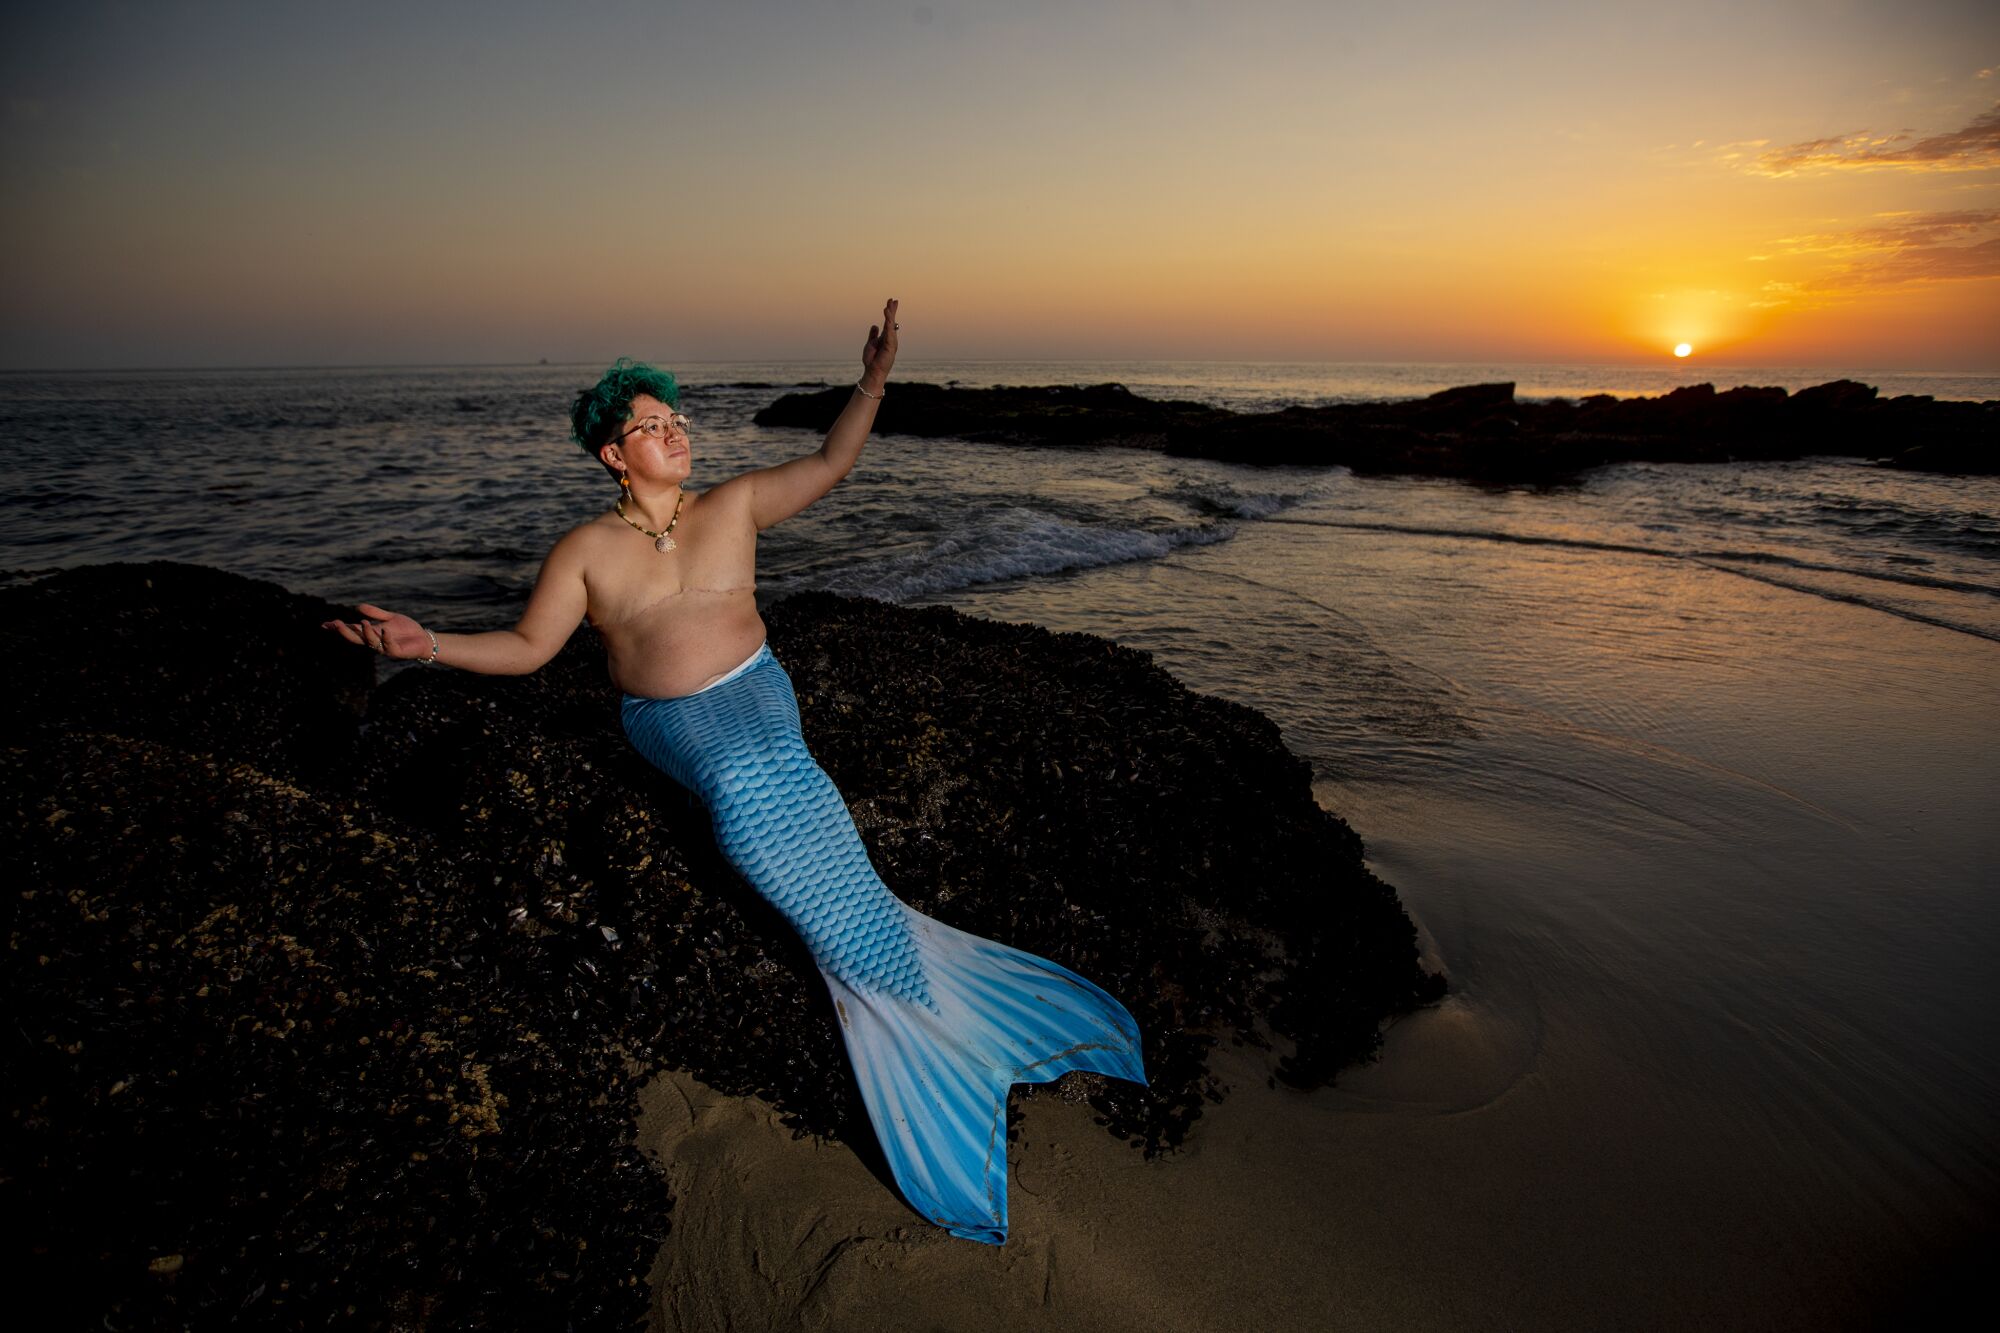 Sammy Silva, wearing full mermaid gear with a tail and no shirt, poses by the beach.